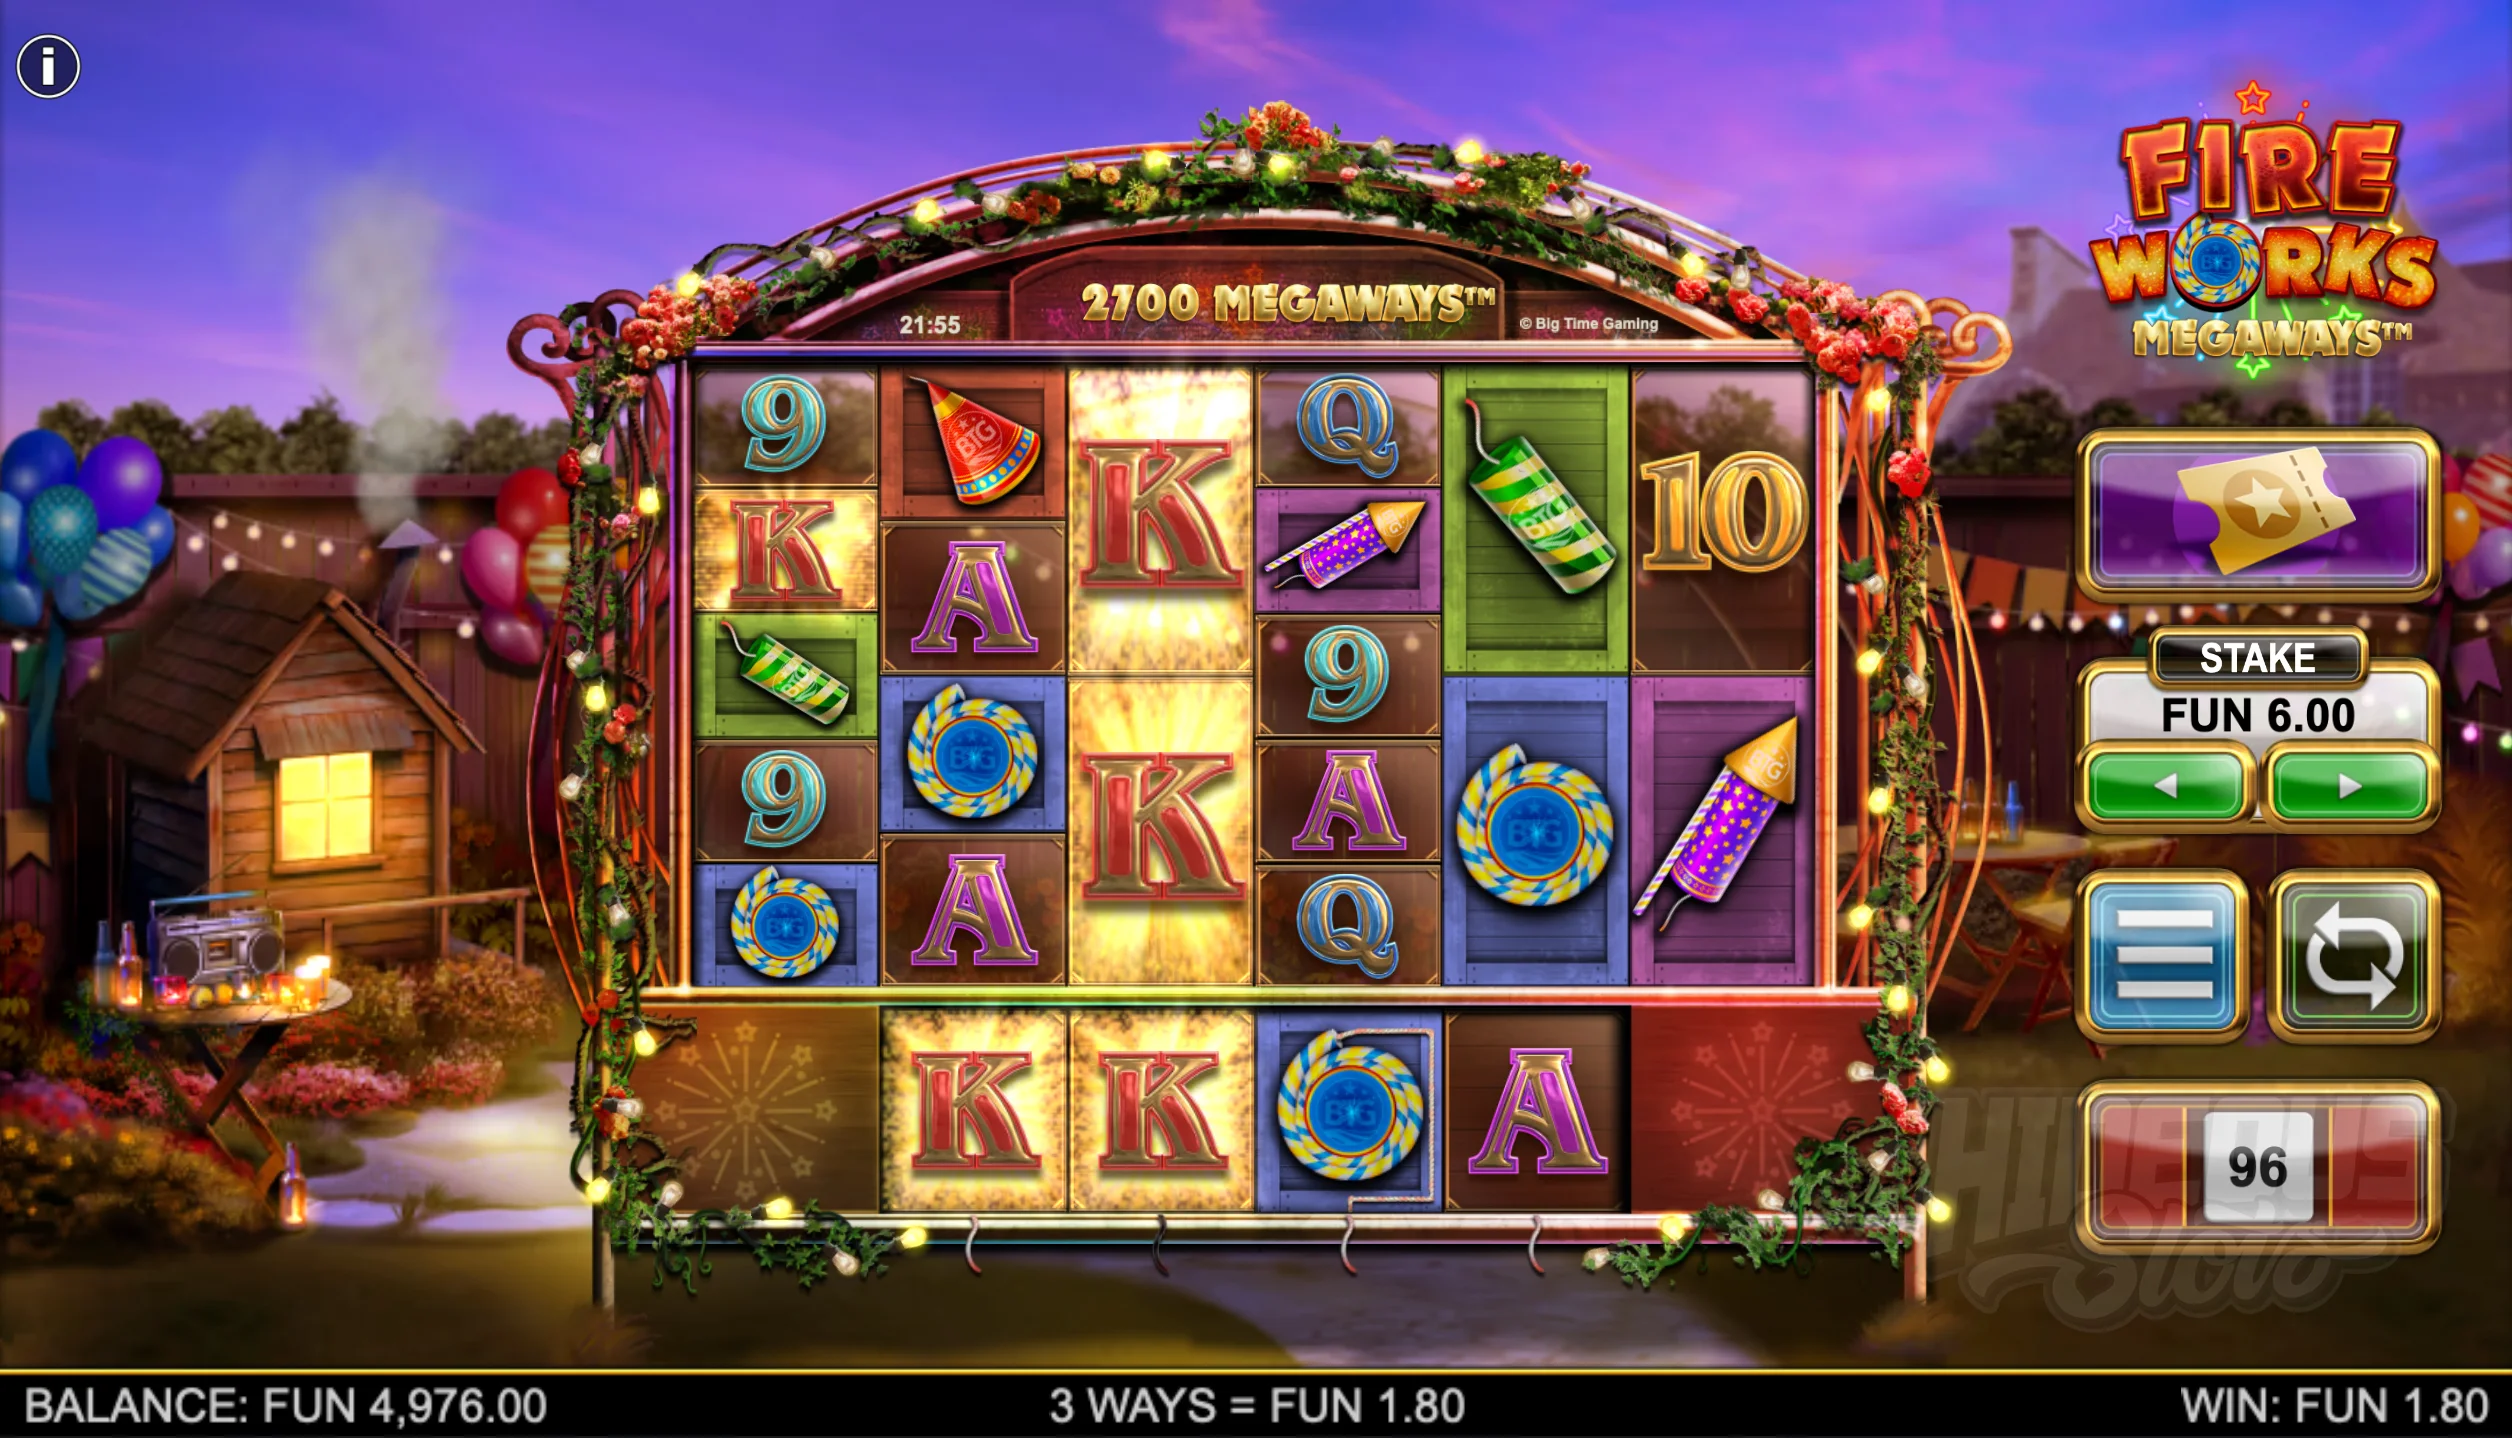 Fireworks Megaways Offers Players up to 117,649 Ways to Win